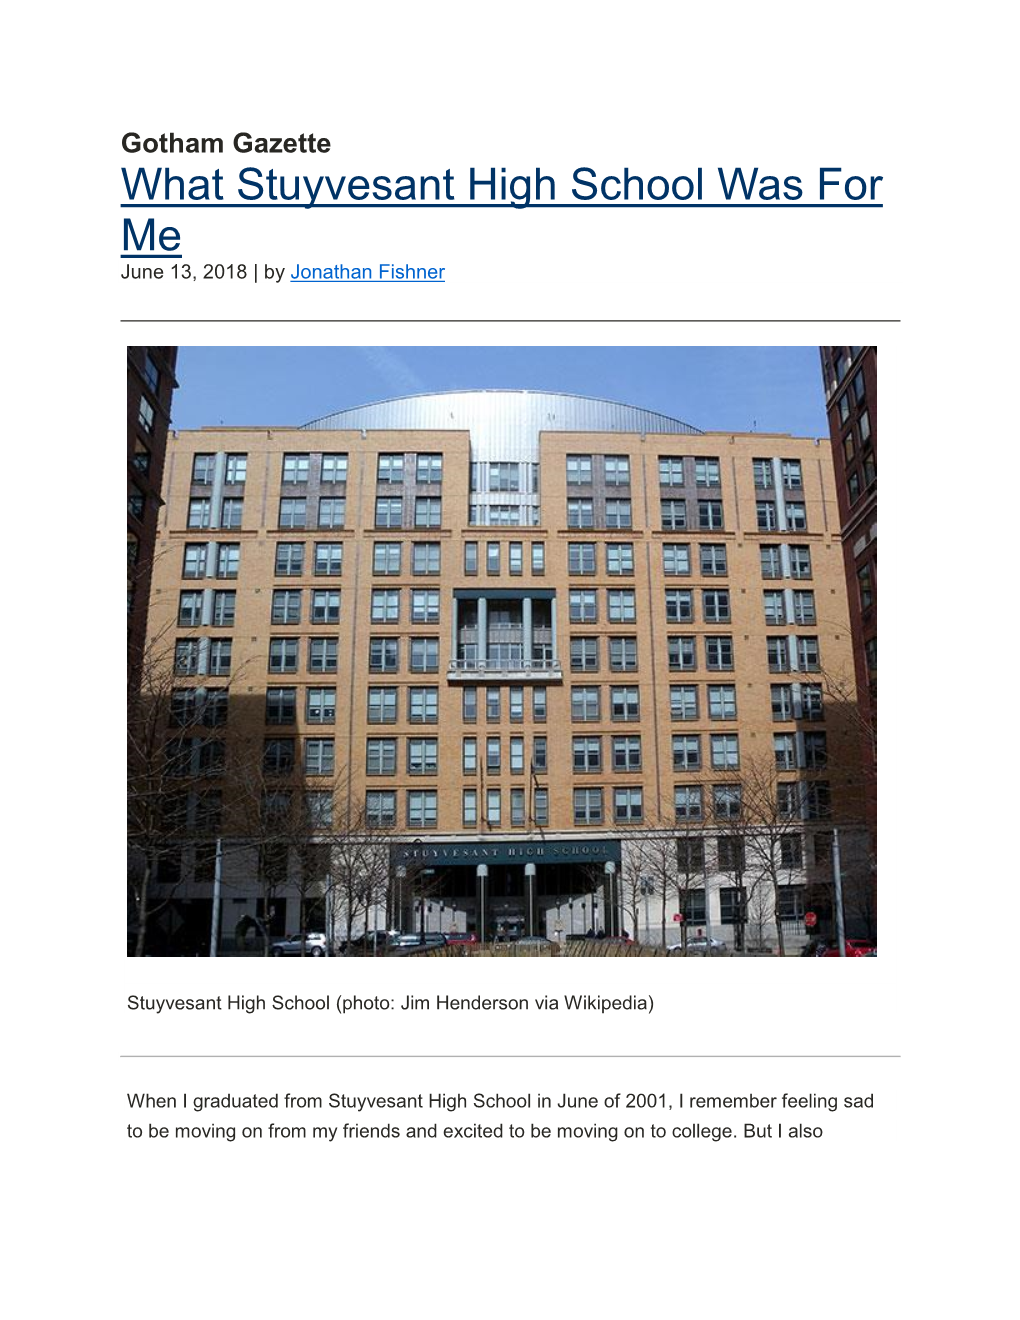 What Stuyvesant High School Was for Me June 13, 2018 | by Jonathan Fishner